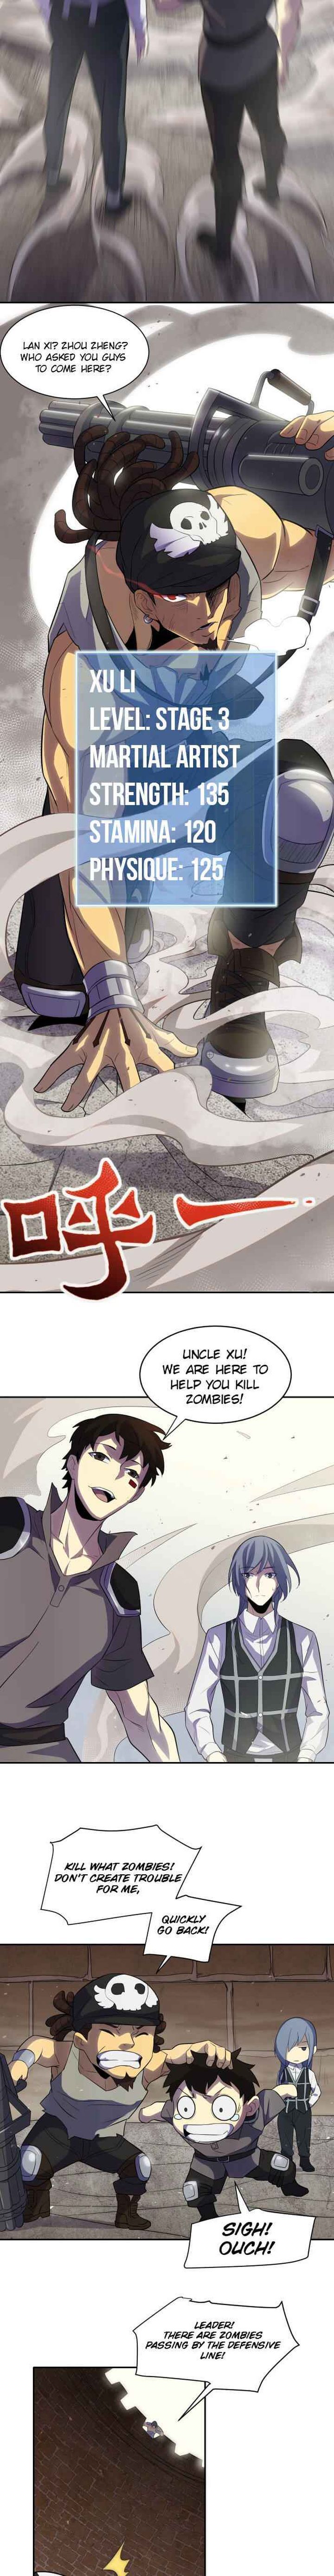 Apocalyptic Thief Chapter 2 Page 10